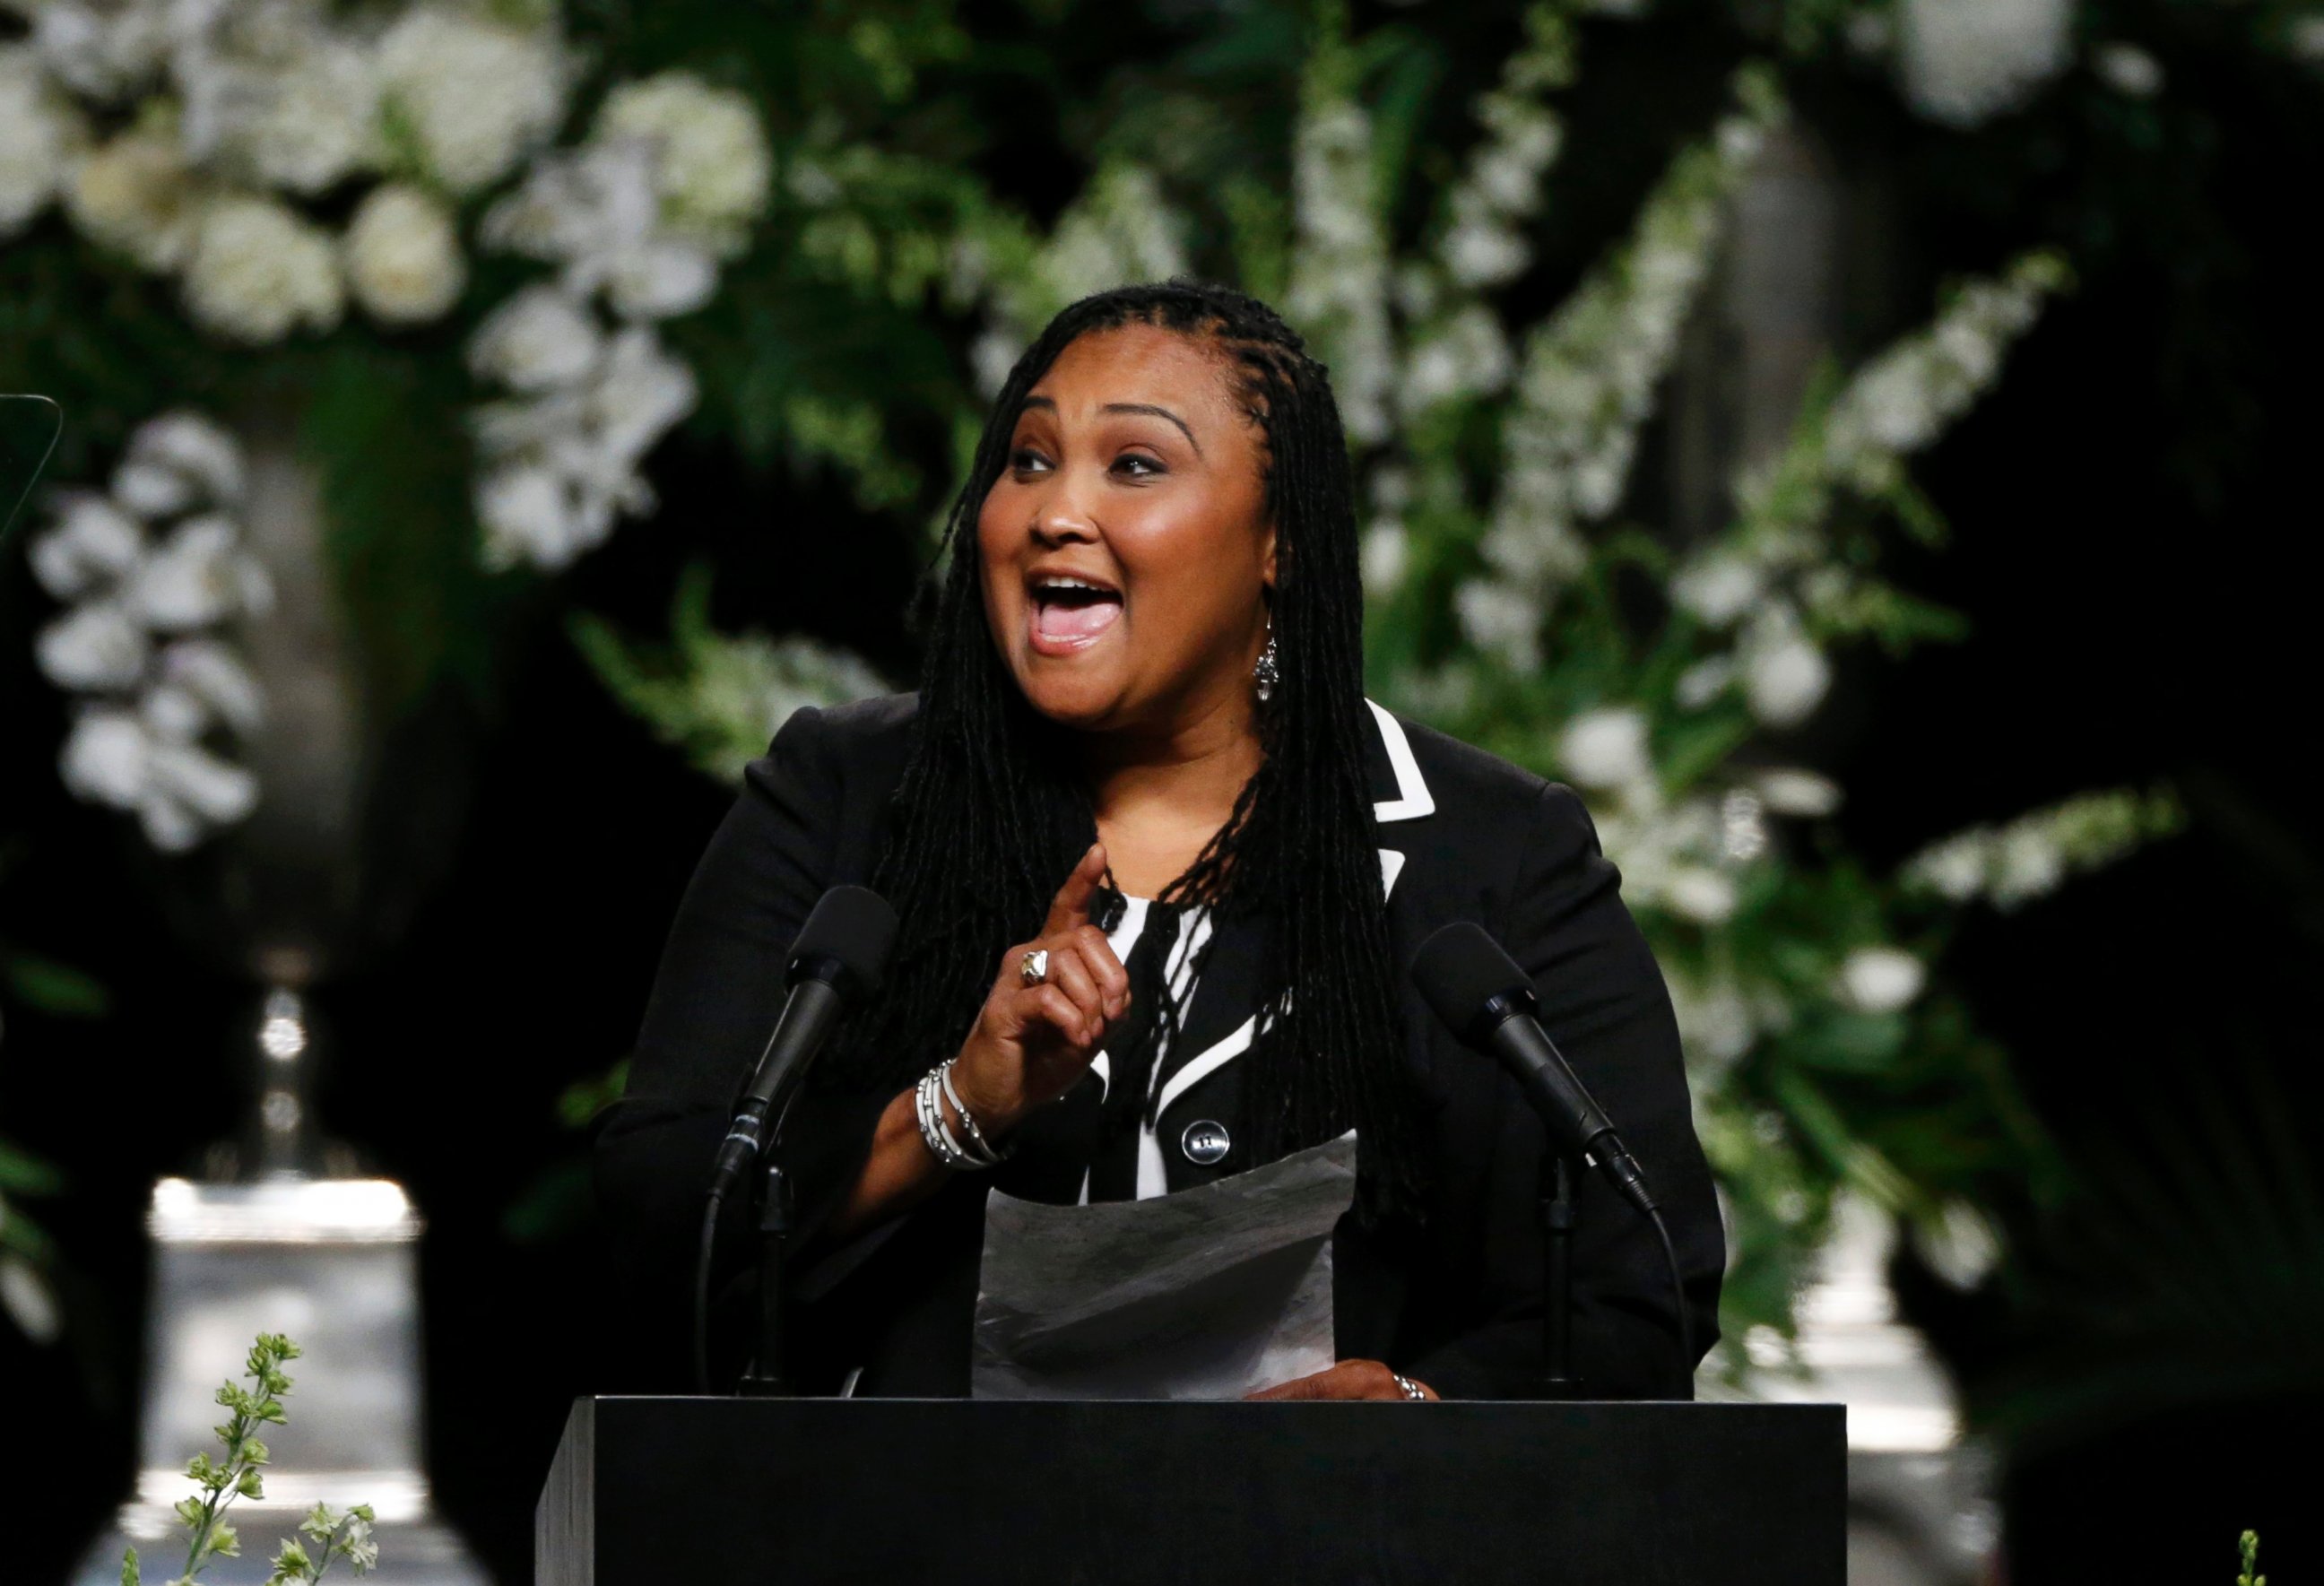 PHOTO: Maryum Ali, the eldest daughter of Muhammad Ali, speaks at a memorial service for the late boxer in Louisville, Kentucky, June 10, 2016.